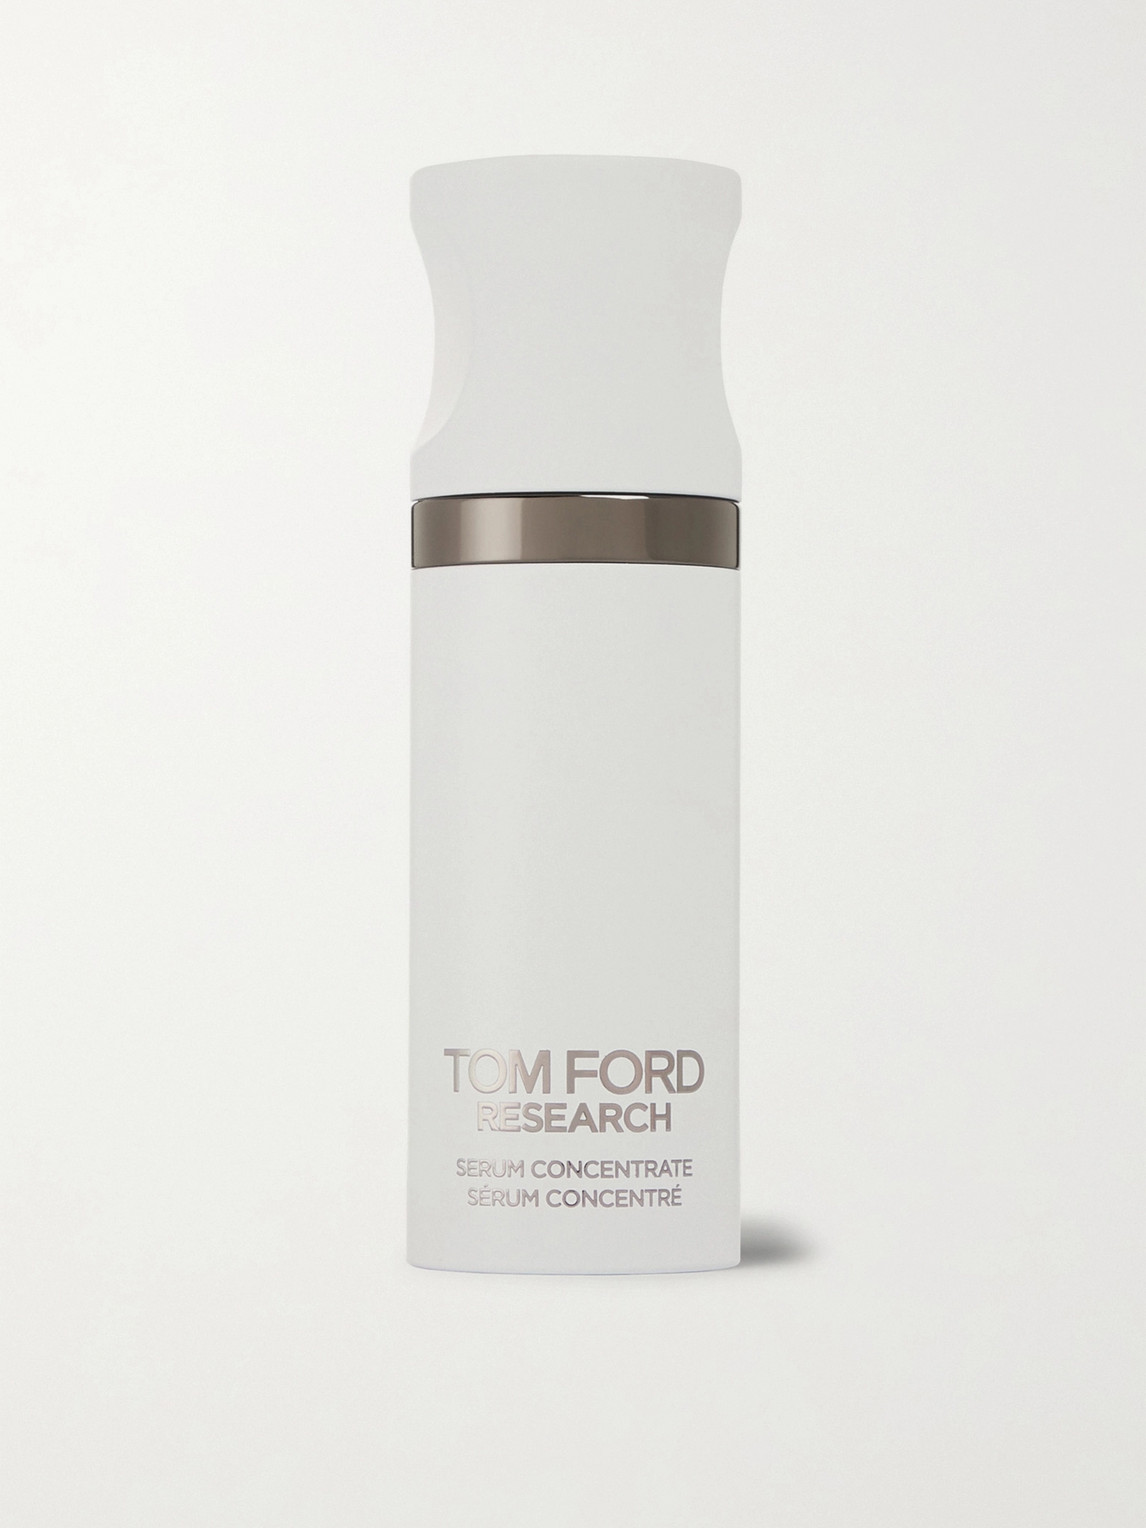 Tom Ford Research Serum Concentrate, 20ml - One Size In Colorless